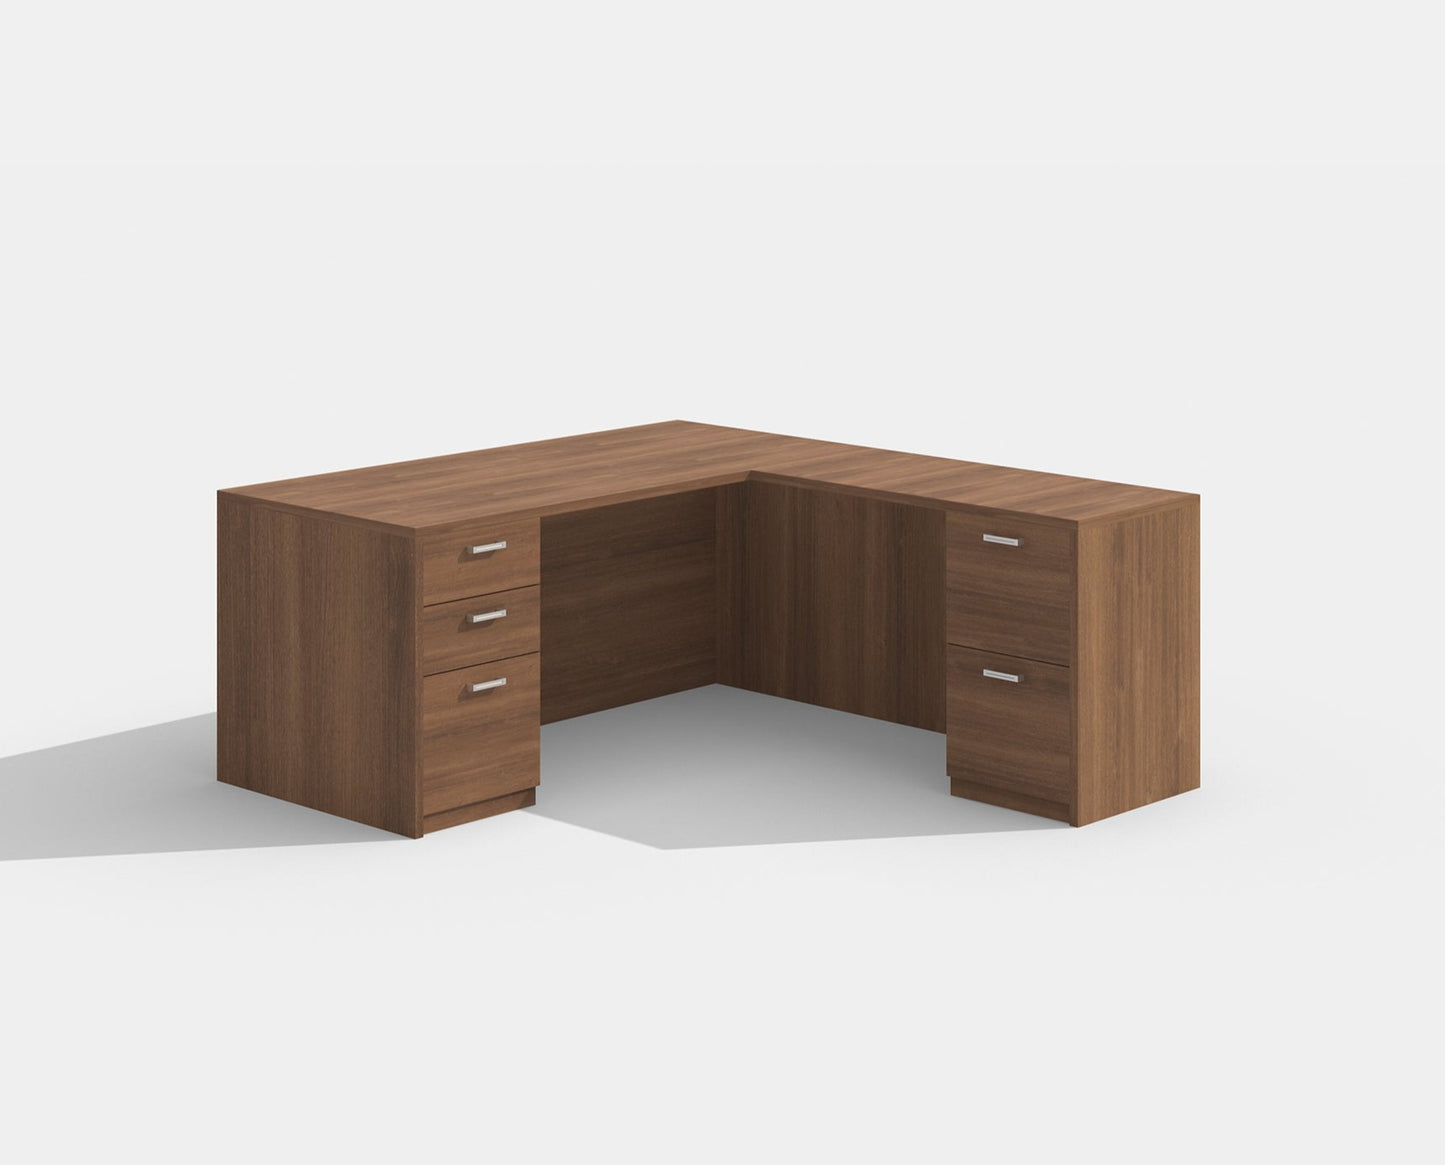 Load image into Gallery viewer, Amber 6x6 L Shaped Executive Office Desk by Cherryman Industries
